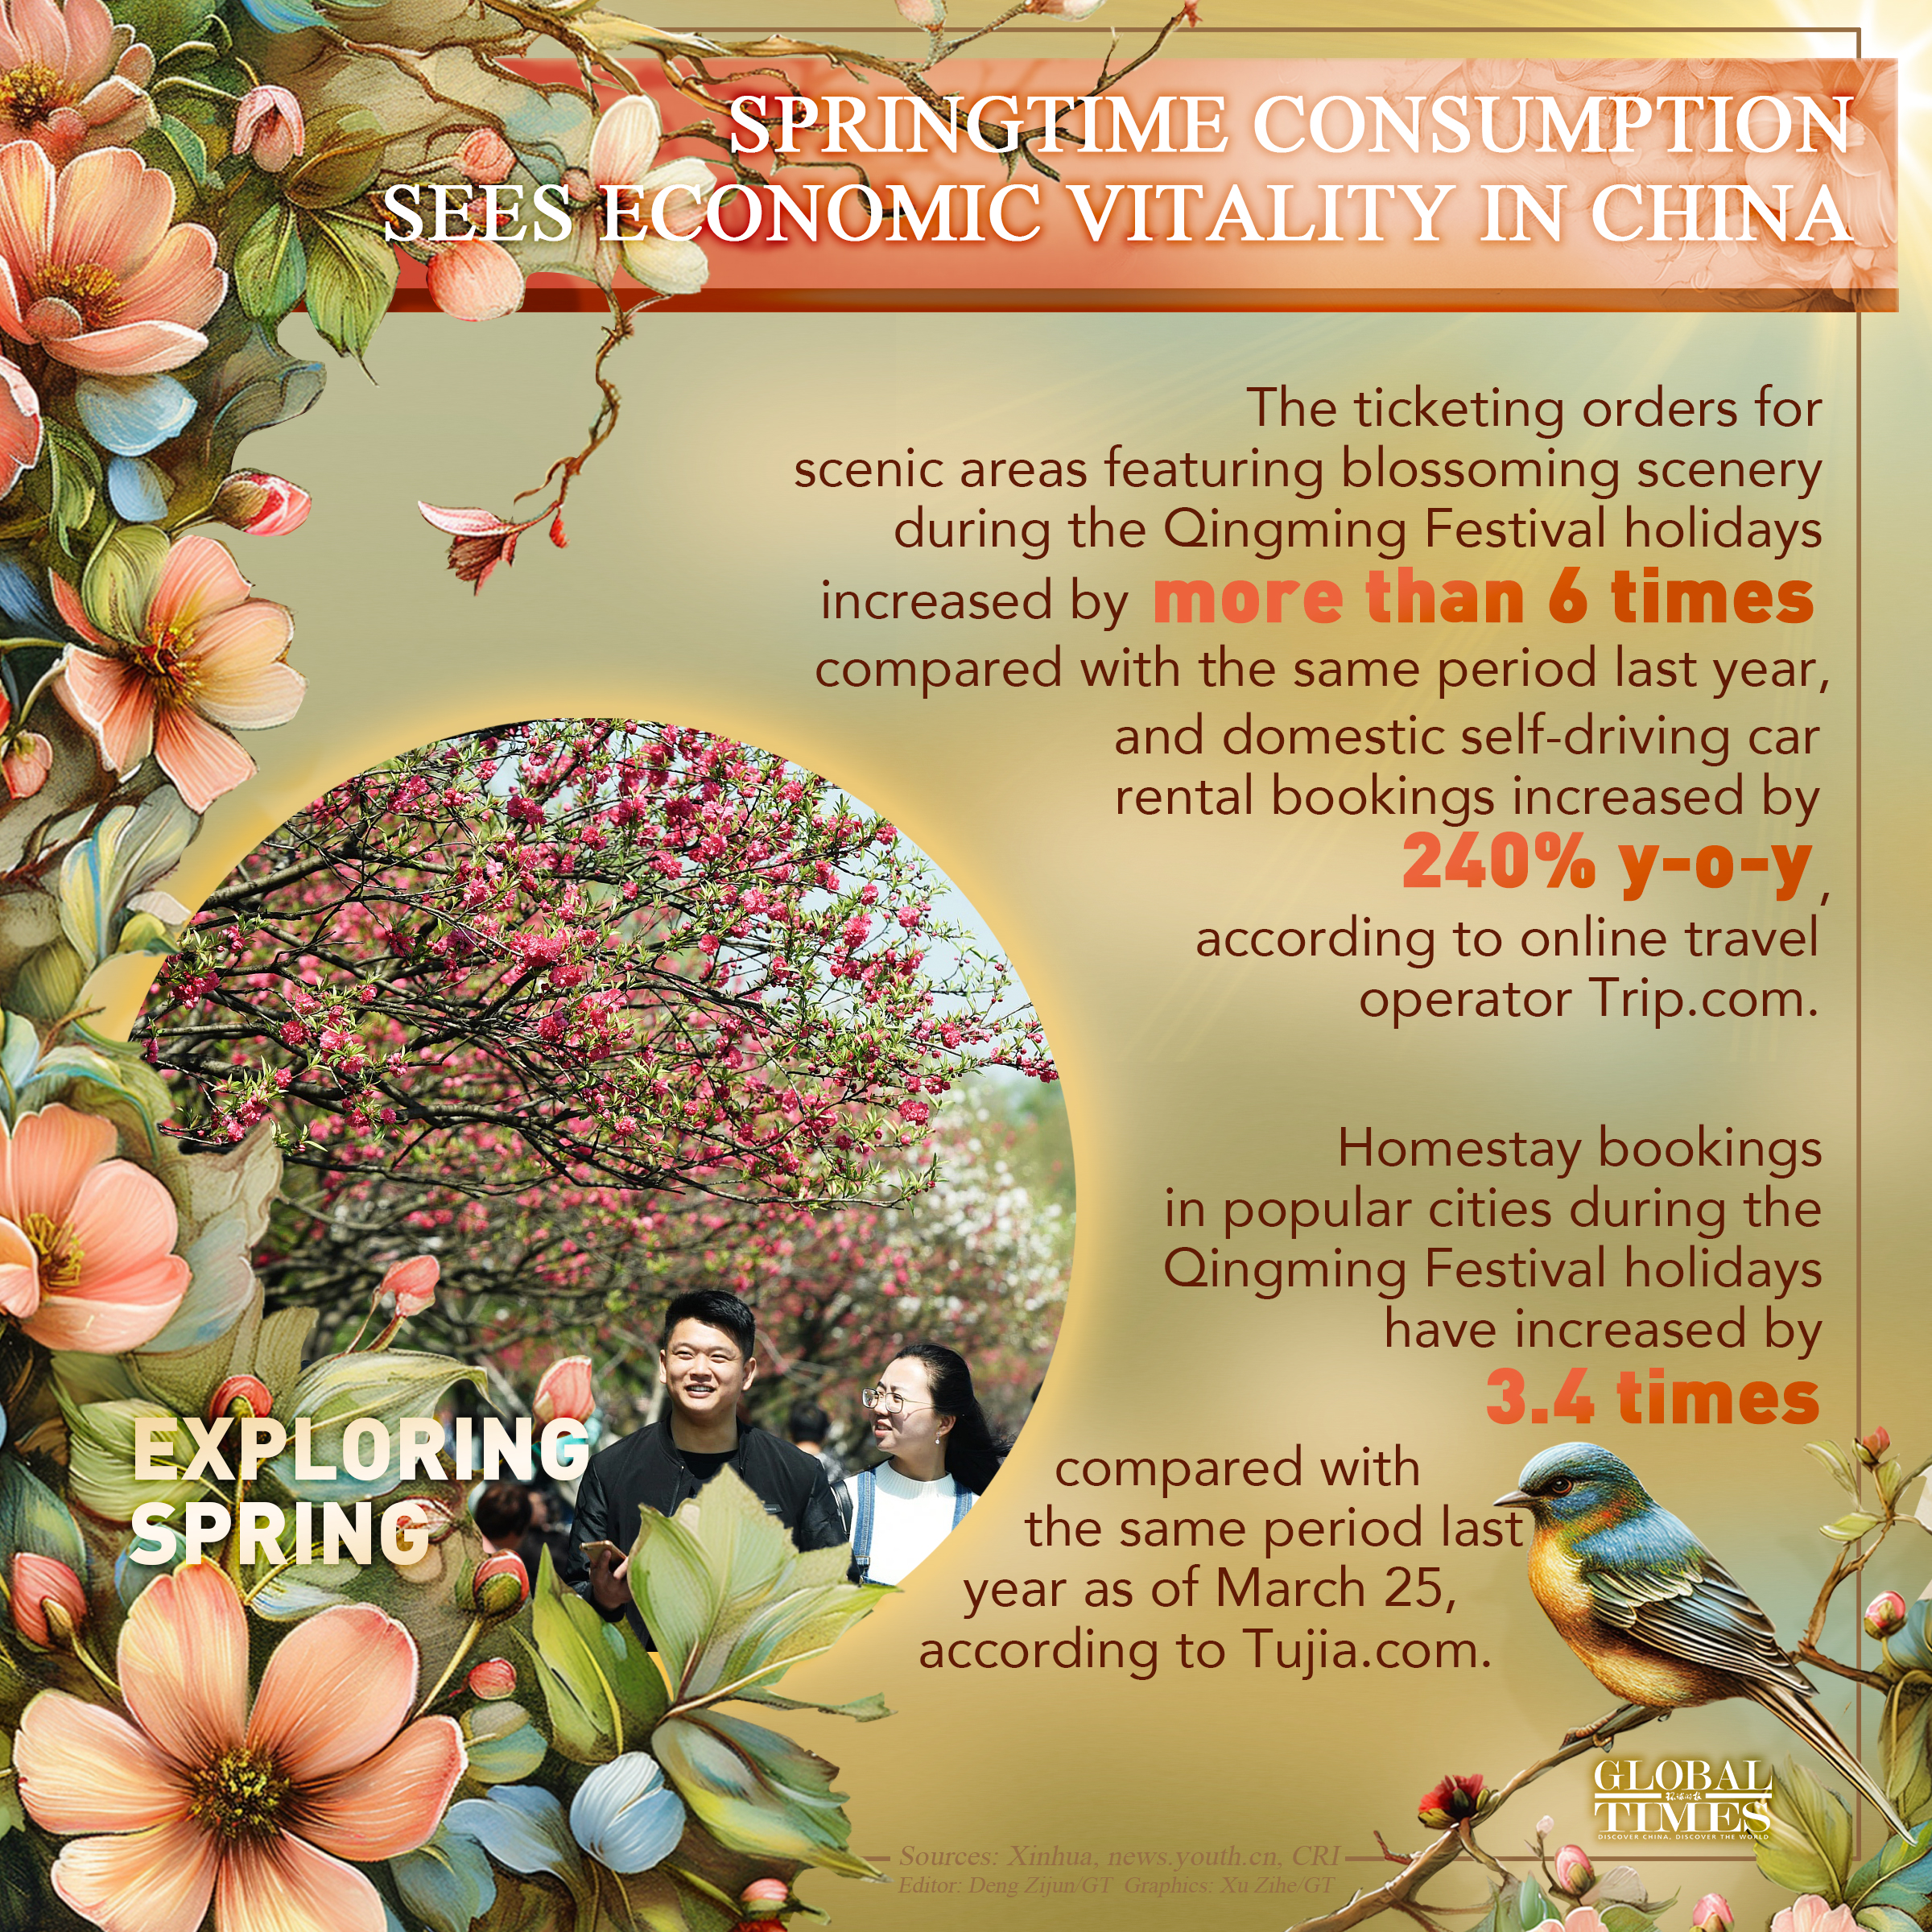 Springtime consumption sees economic vitality in China
. Graphic: GT